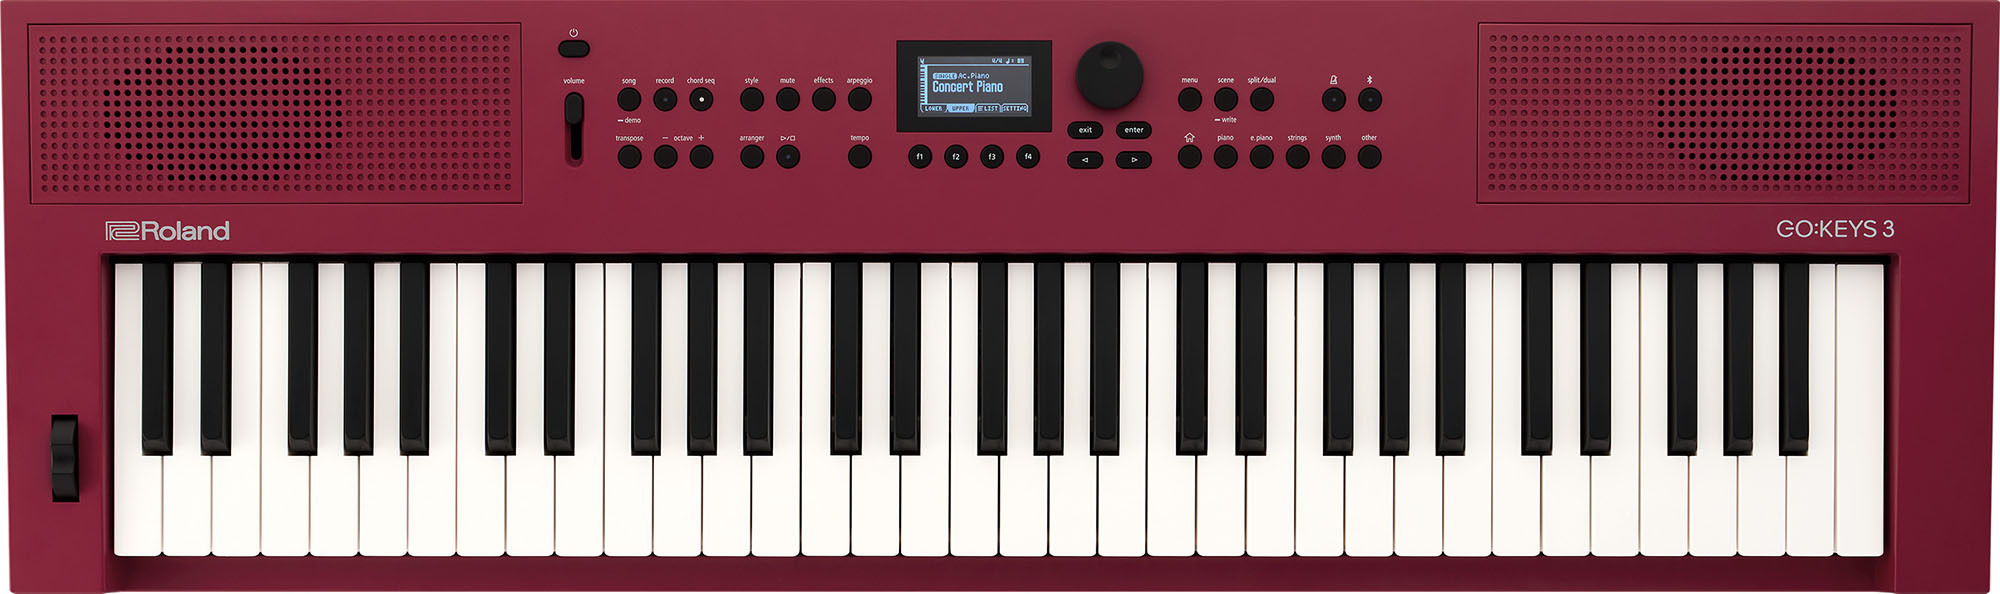 Roland Go:keys-3-rd - Entertainer Keyboard - Main picture